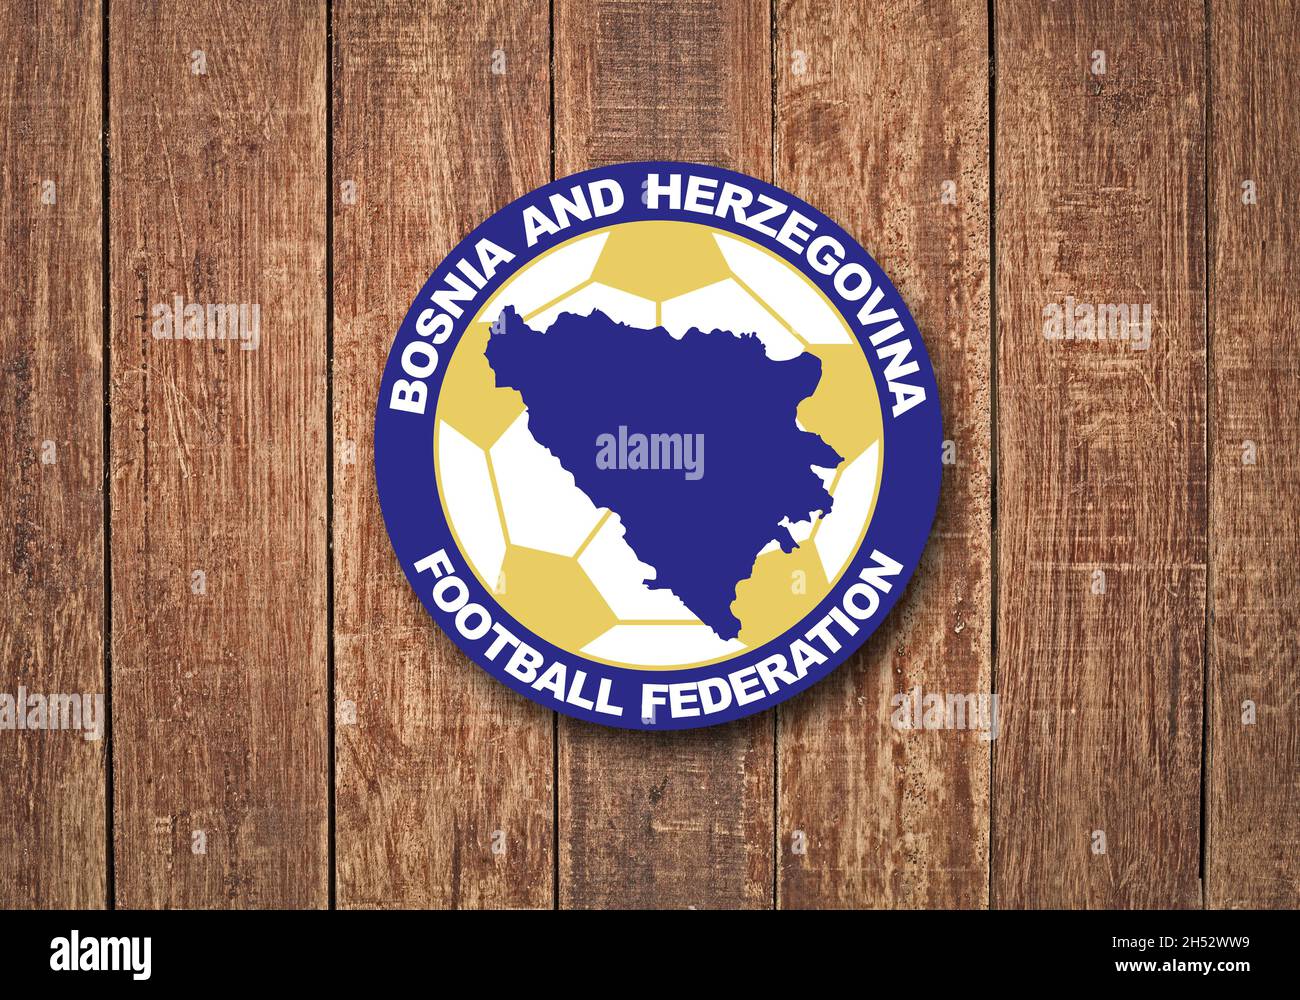 The coat of arms of the Football Association of Bosnia and Herzegovina on a wooden background Stock Photo